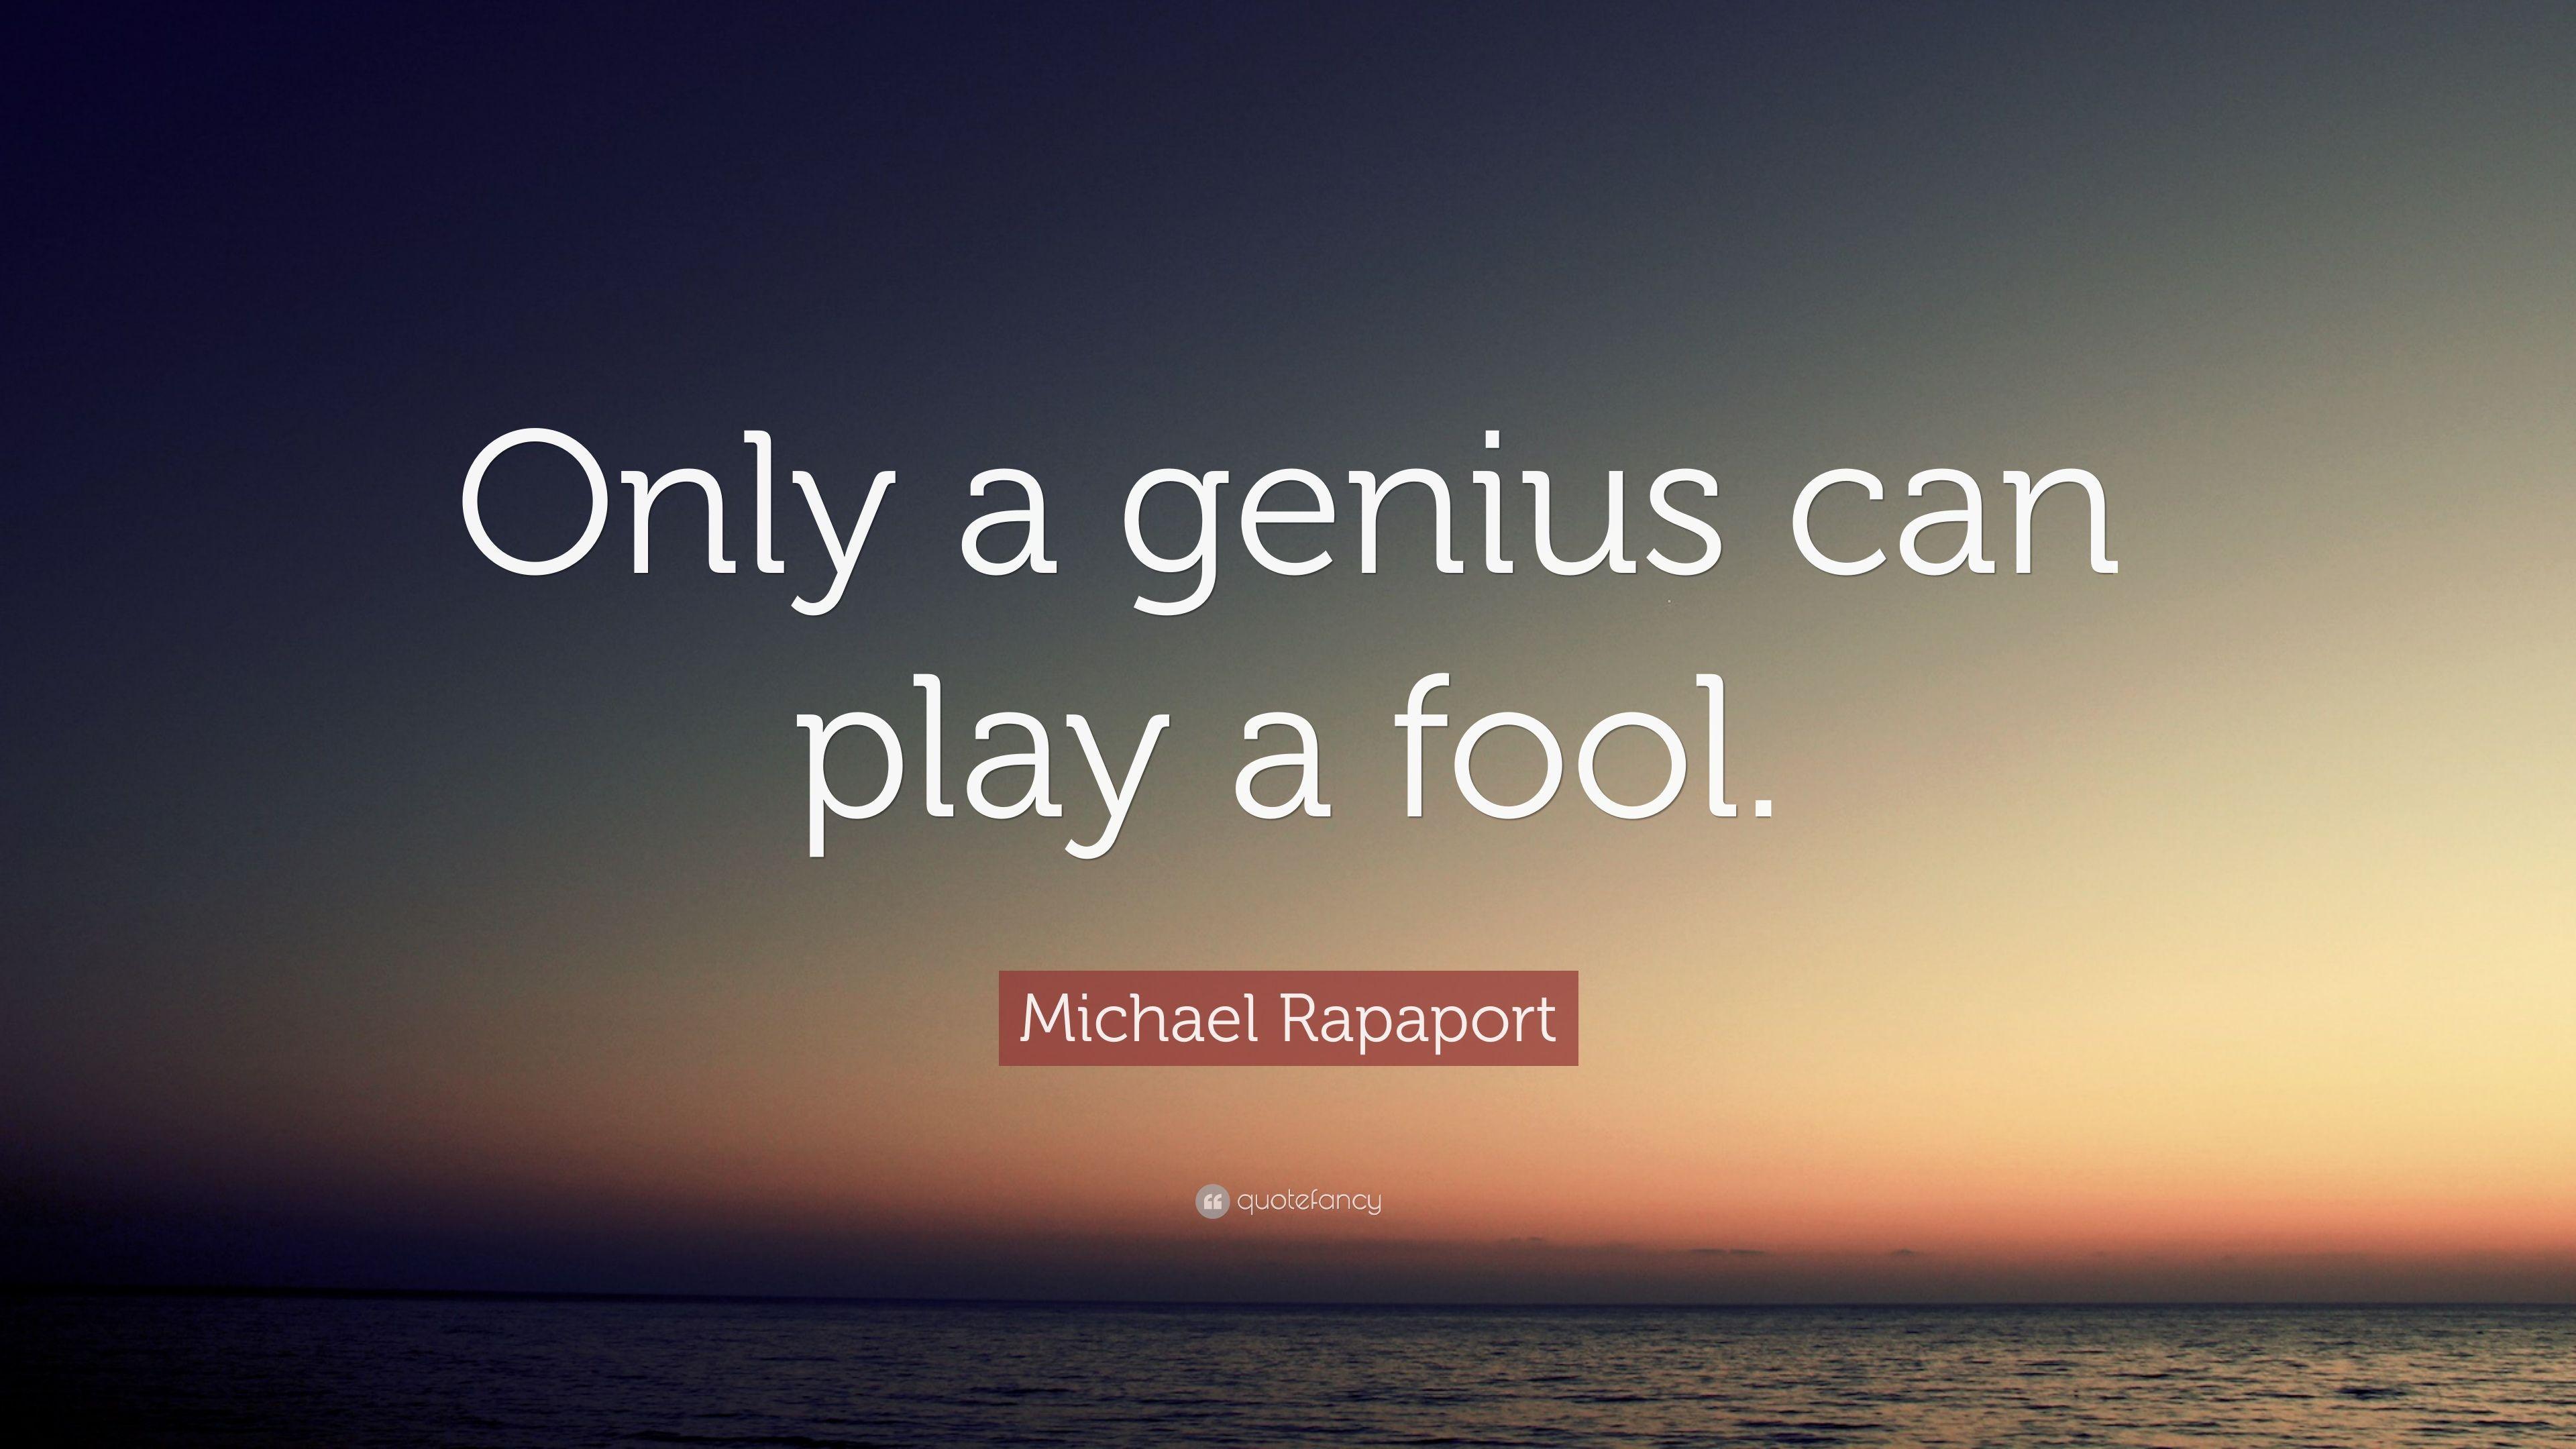 Michael Rapaport Quote: “Only a genius can play a fool.” 10